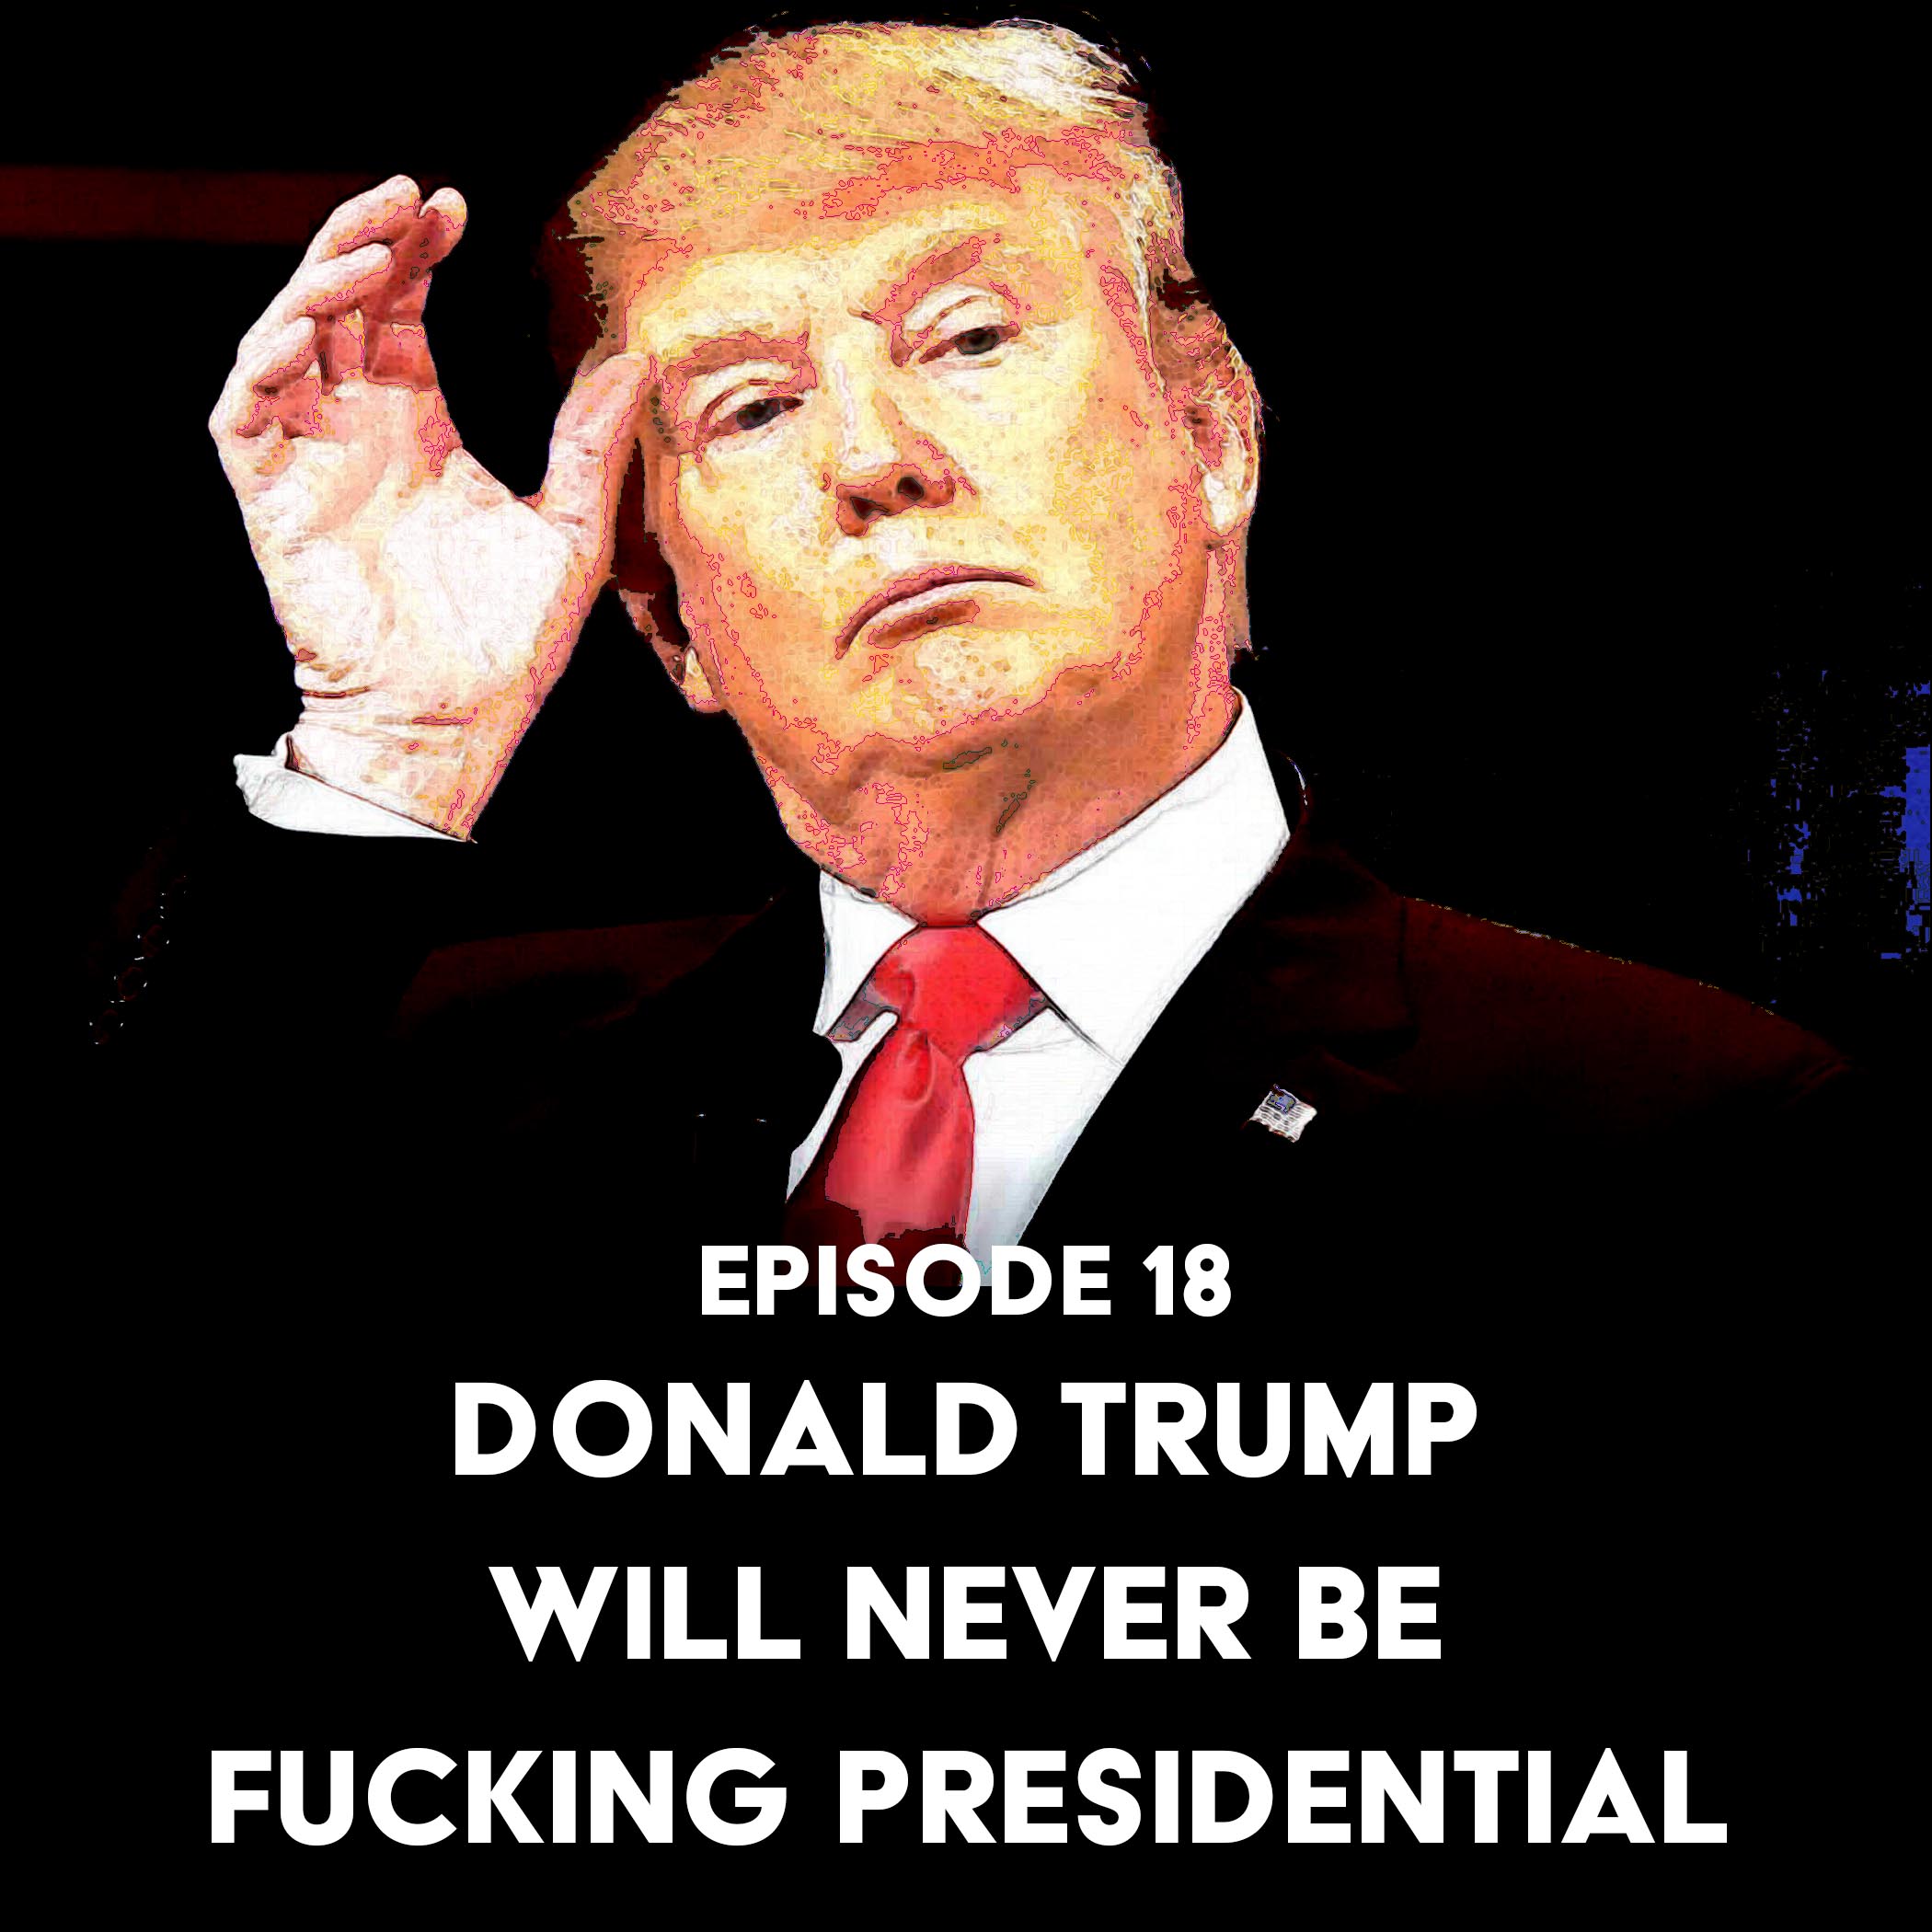 Episode 18: Donald Trump Will Never Be Fucking Presidential